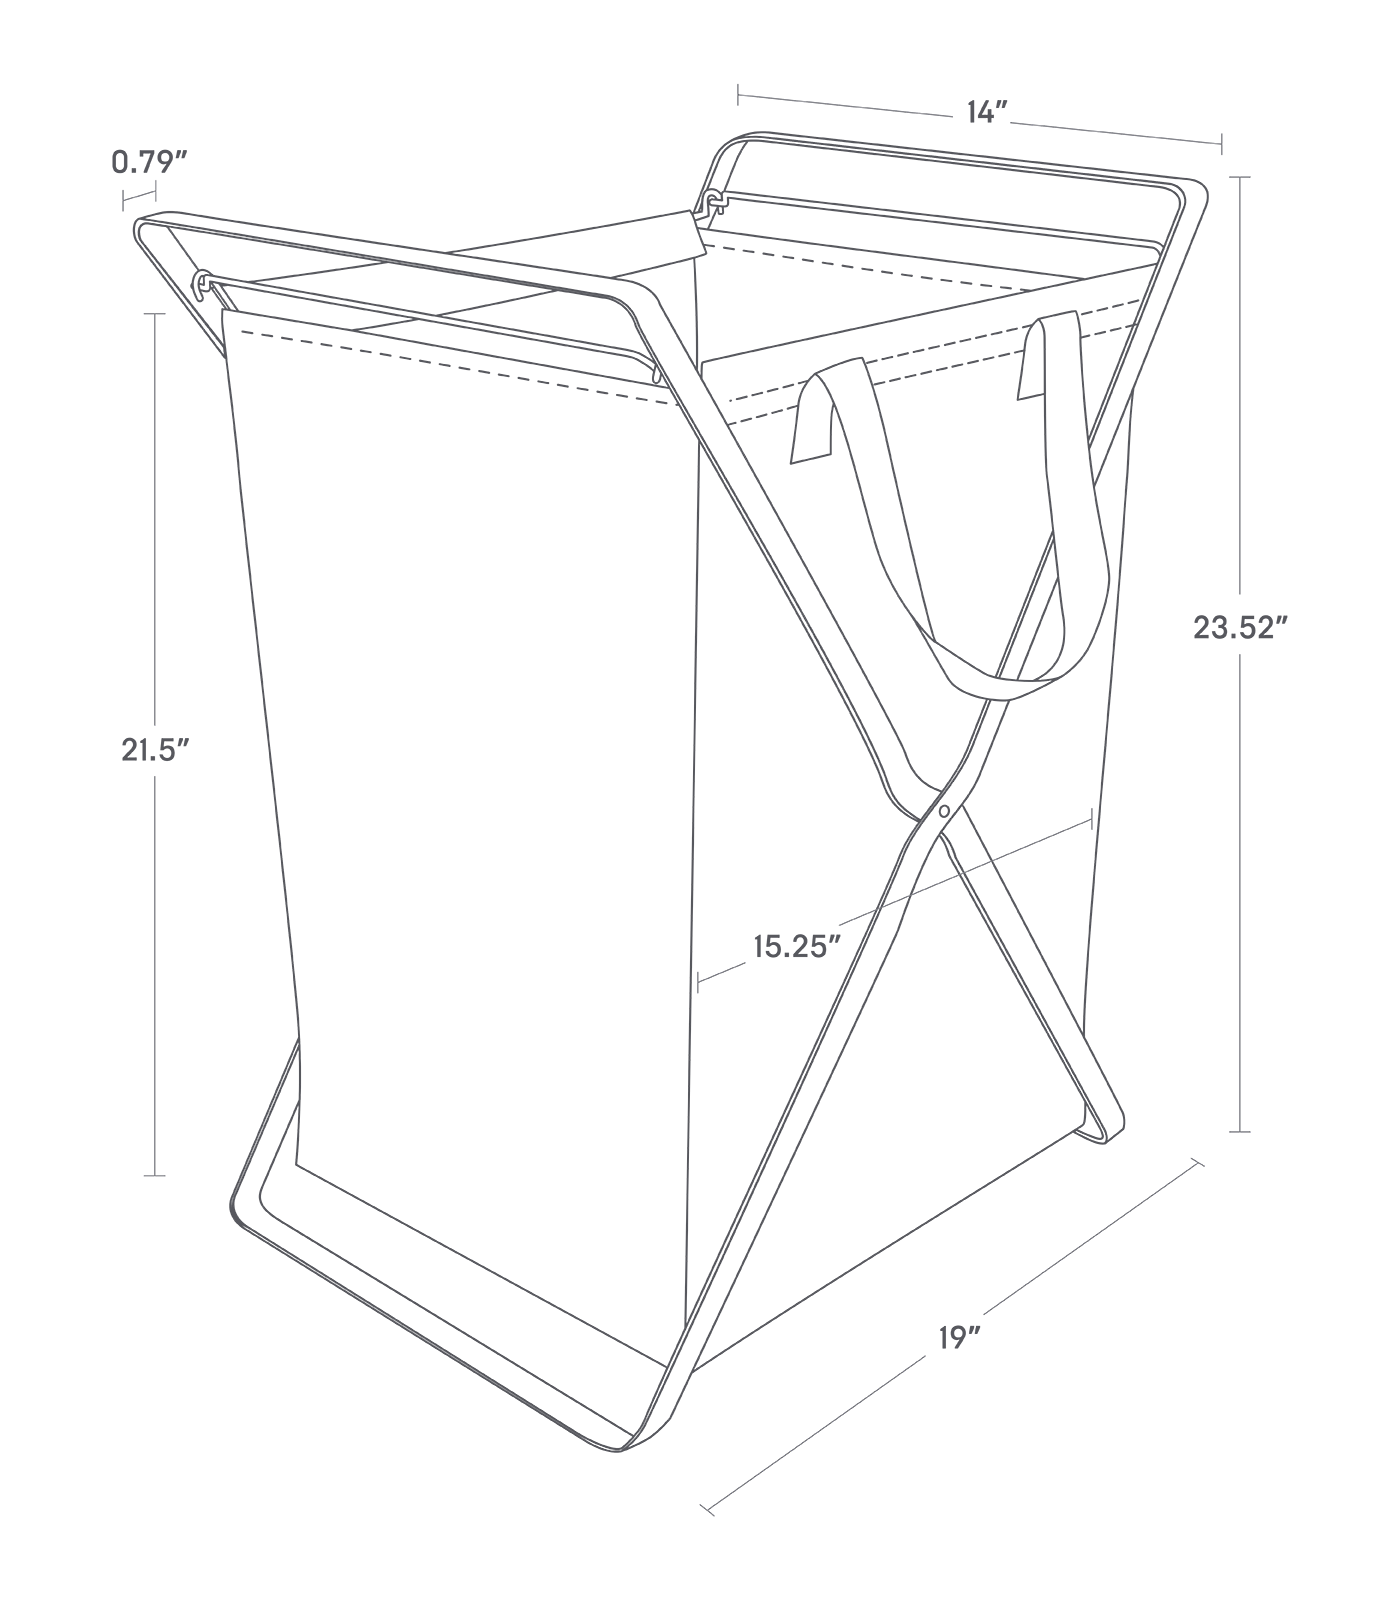 Dimension image for Laundry Hamper with Cotton Liner showing length of 14